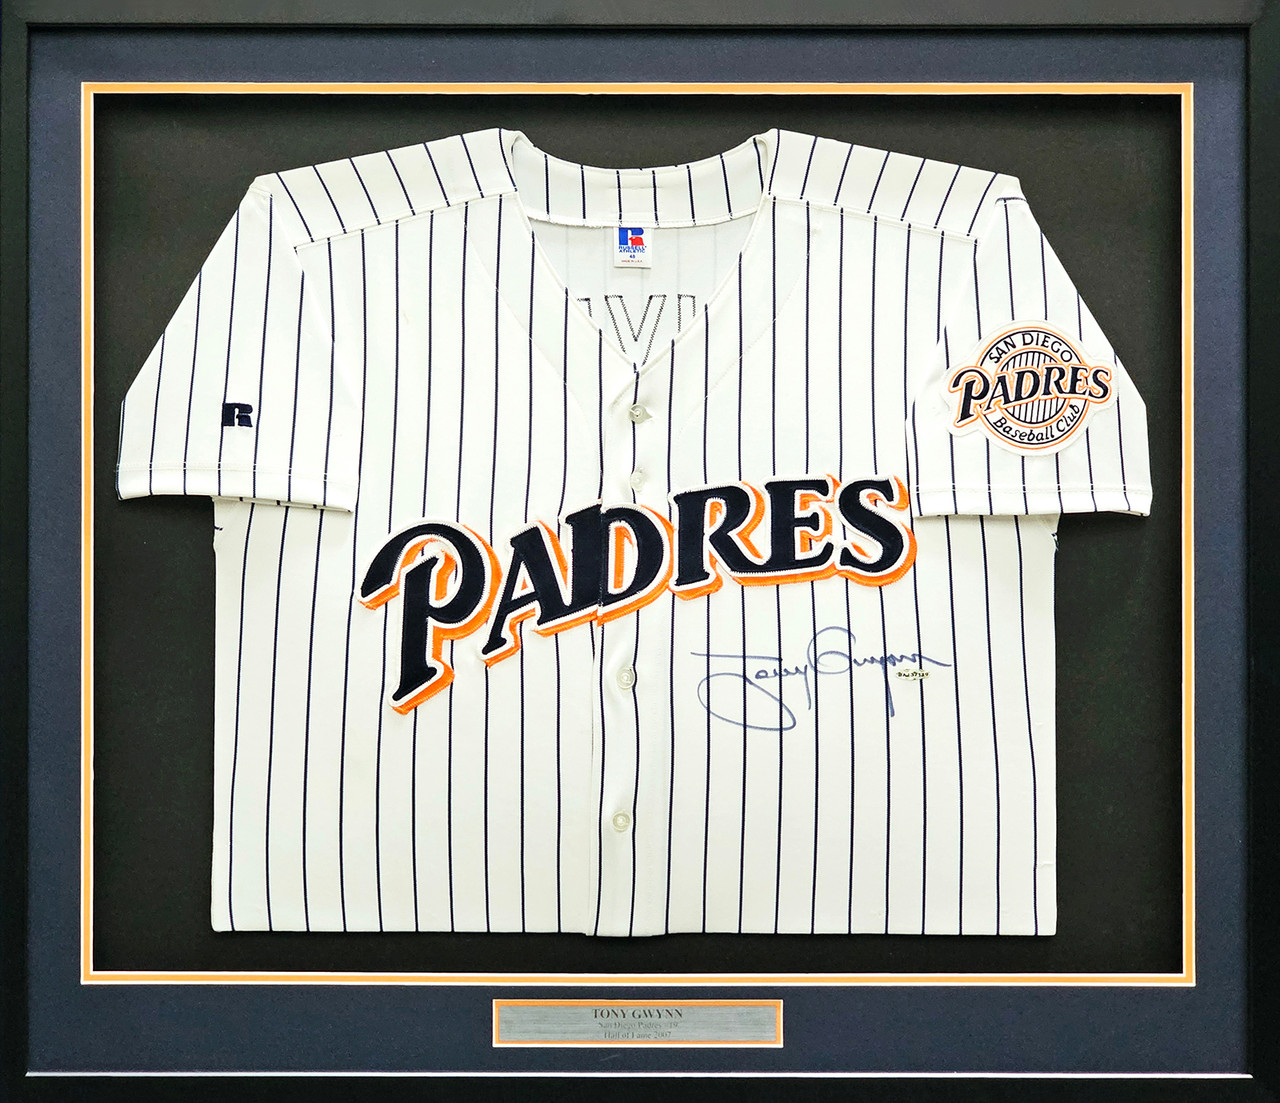 Sold at Auction: Larry, Athur Russell, April 28, 1999 Tony Gwynn autographed  San Diego Padres professional model road jersey attributed to career hits  #2,958 and 2,959 (Gwynn Sports COA).